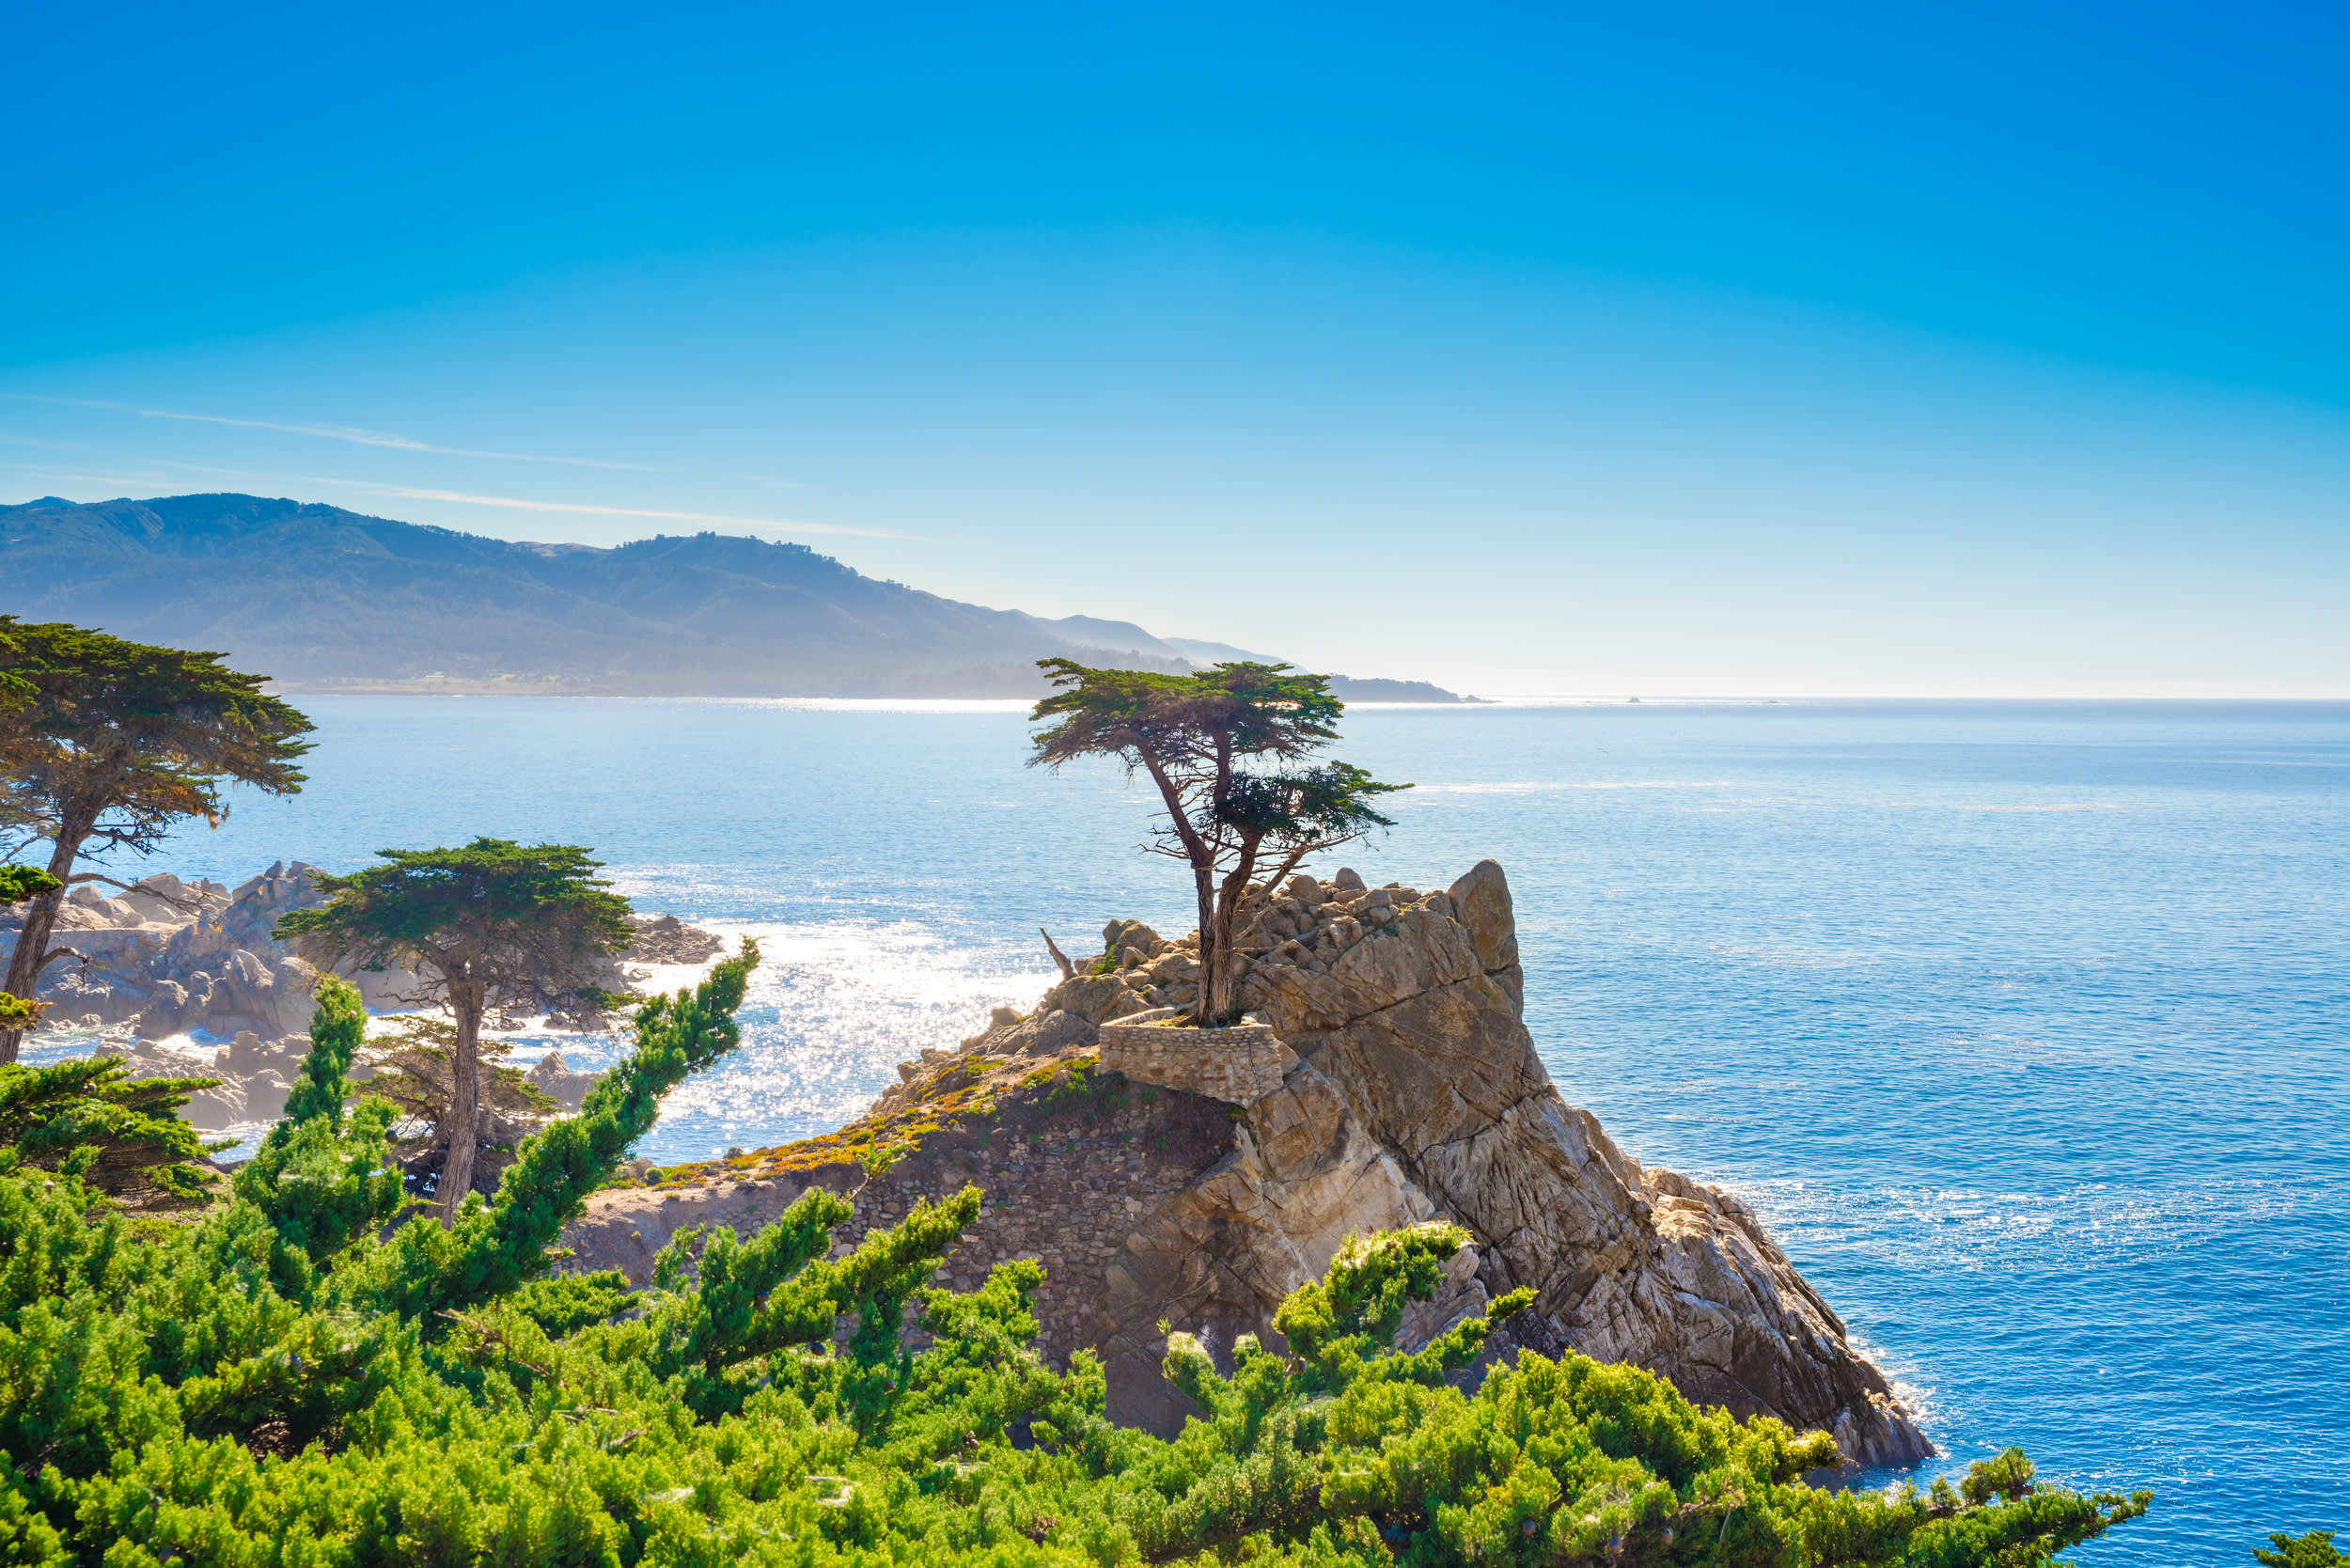 The Lone Cypress, seen from the 17 Mile Drive, in Pebble Beach, California